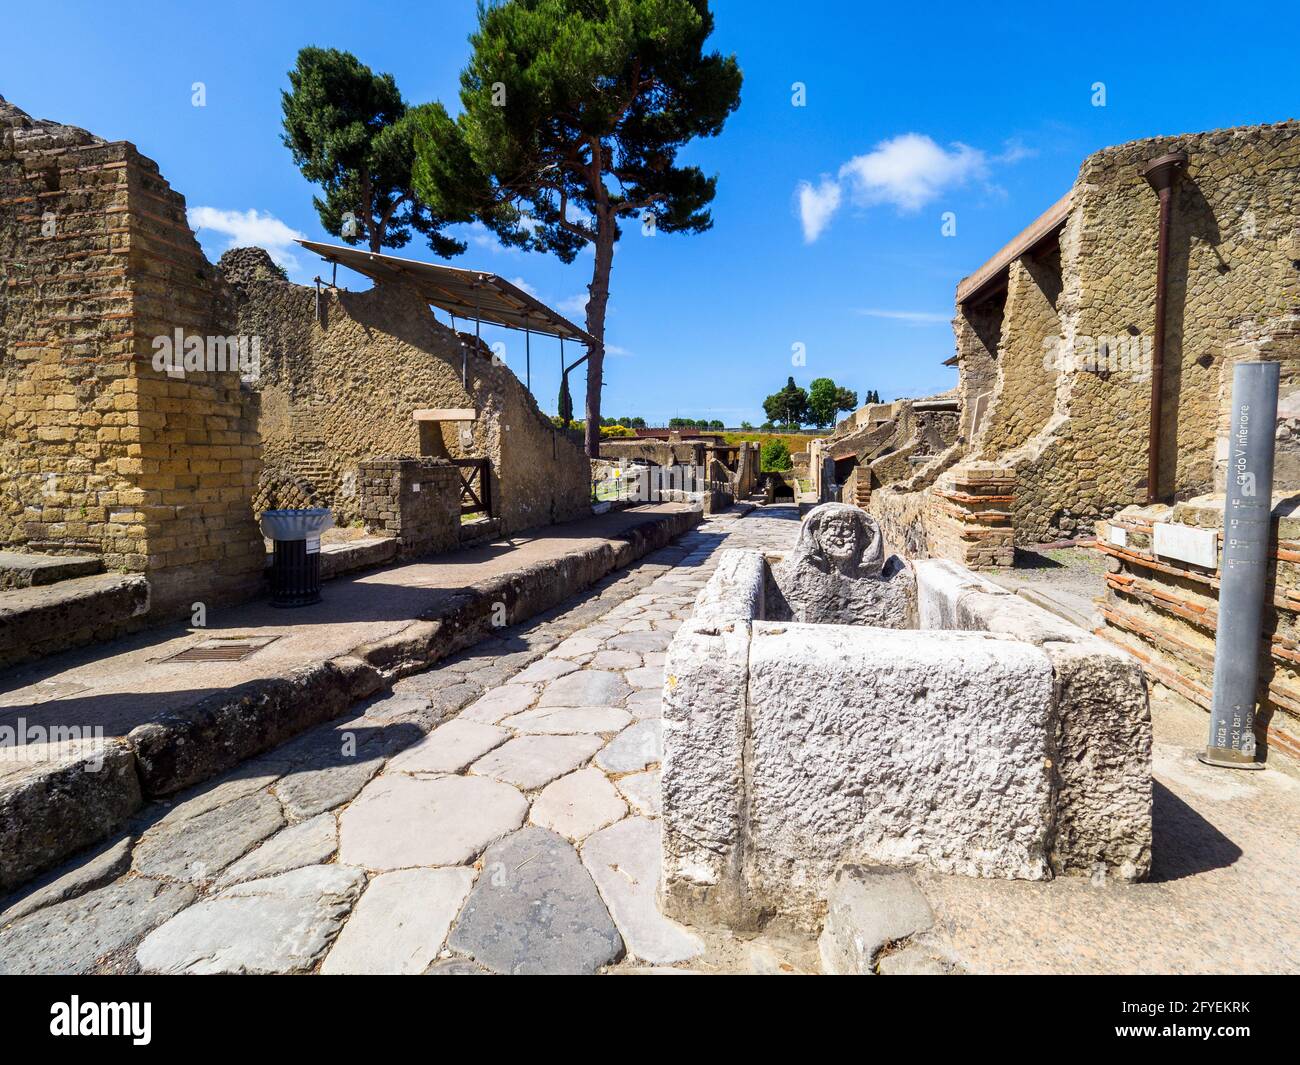 Water well and paved street (Cardo V inferiore) - Herculaneum ruins, Italy Stock Photo